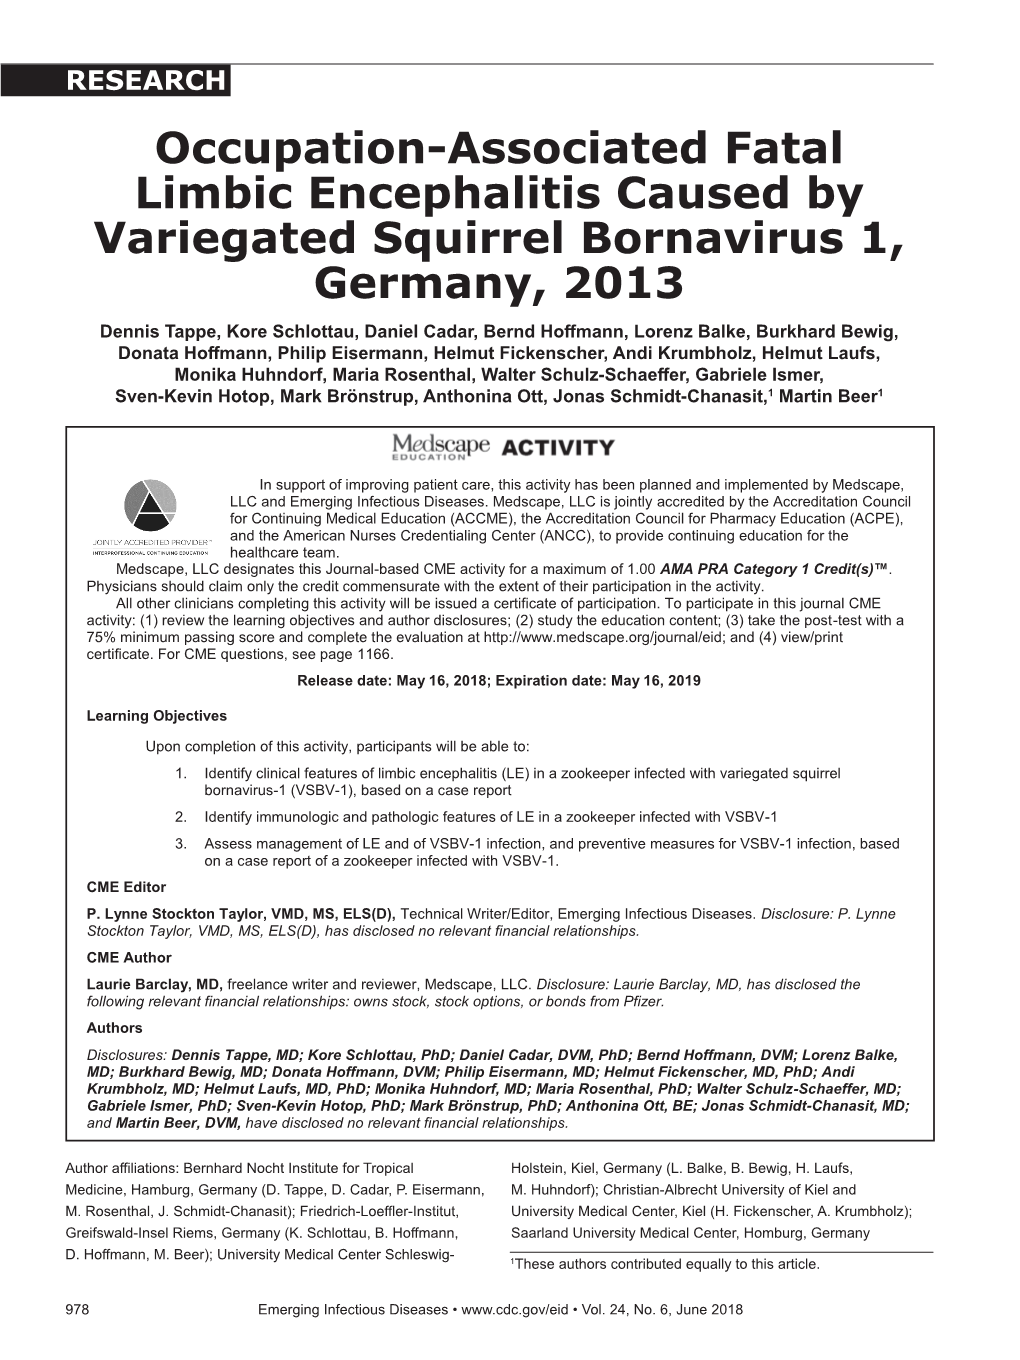 Occupation-Associated Fatal Limbic Encephalitis Caused by Variegated Squirrel Bornavirus 1, Germany, 2013